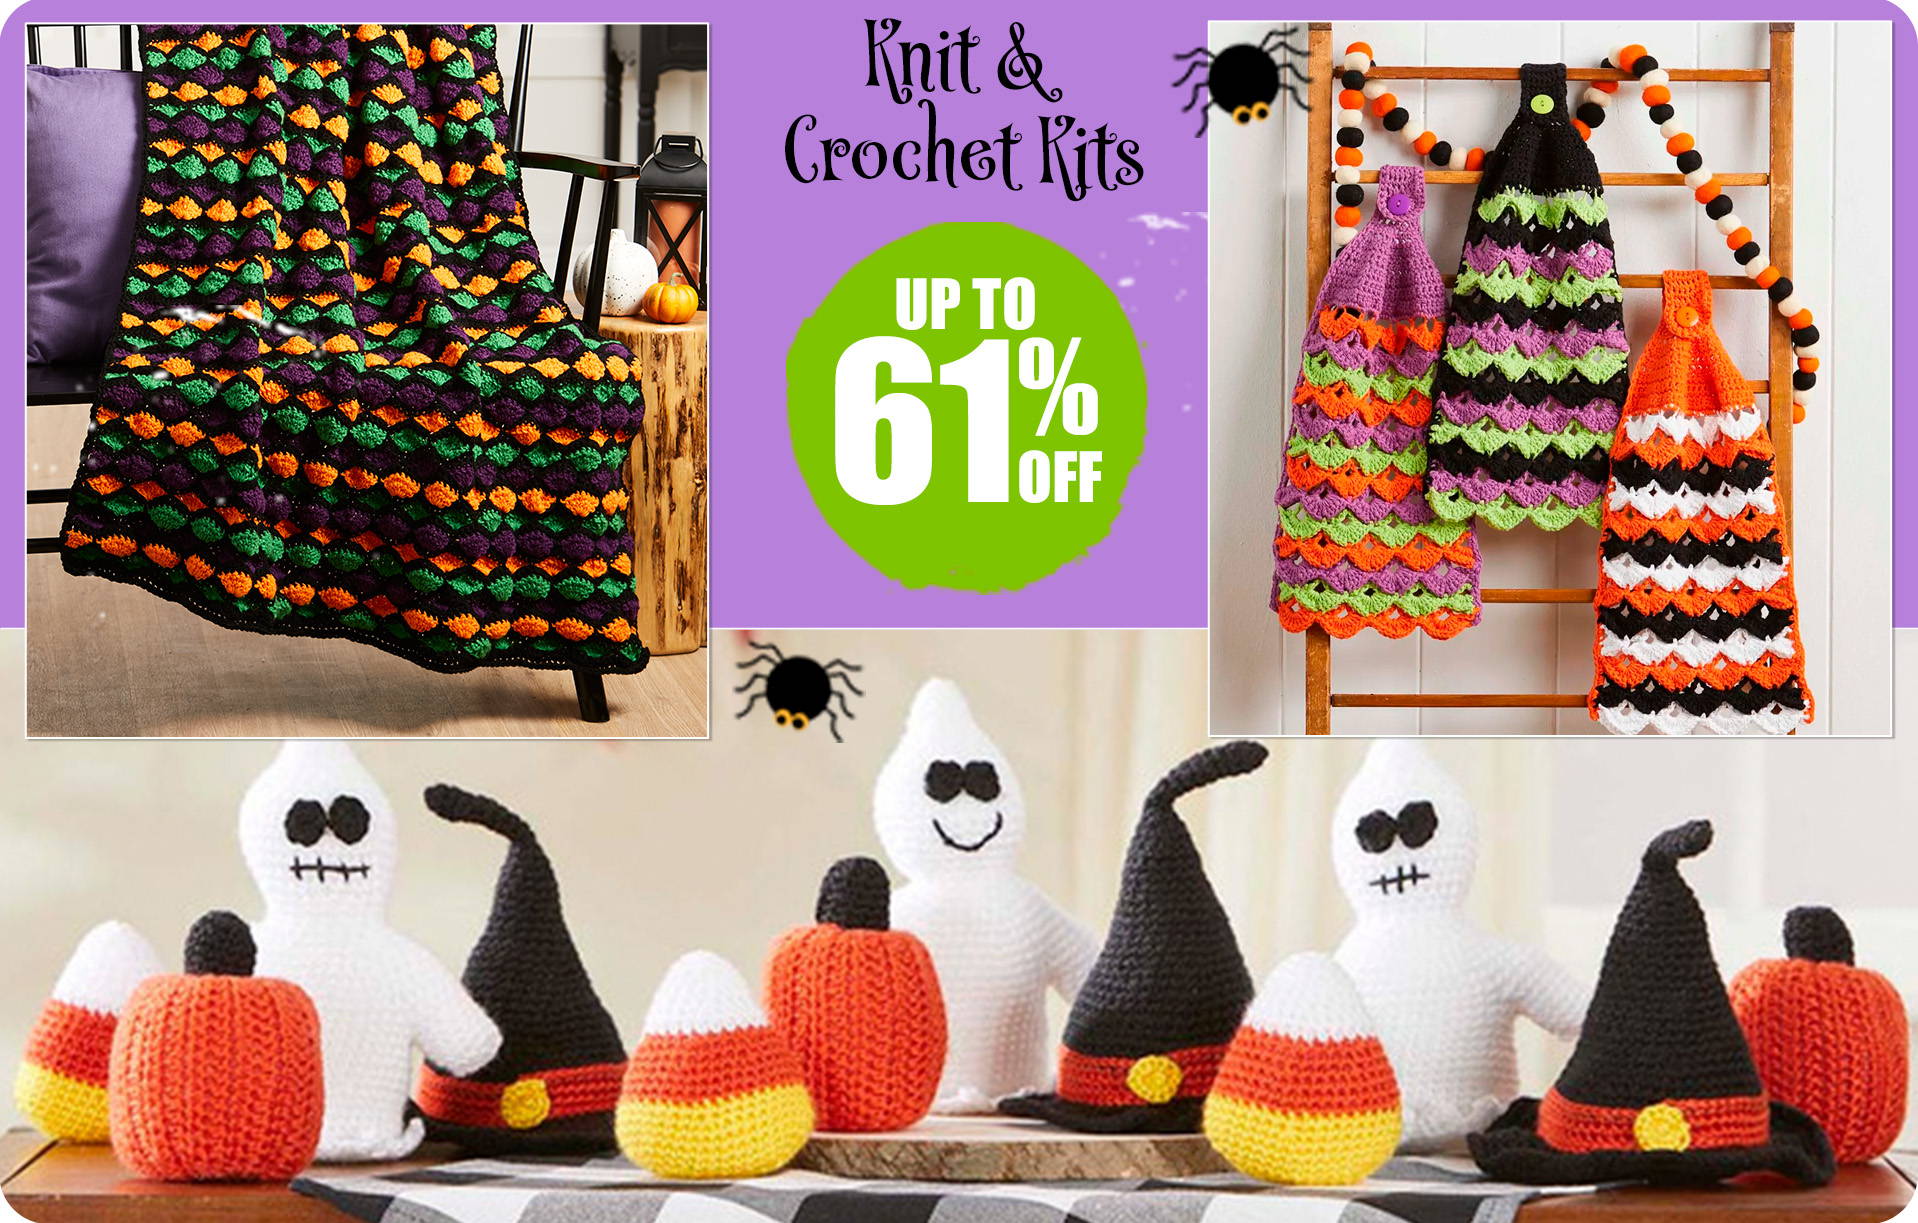 Yarn, Knit, and Crochet Kits up to 44% off! Image: Herrschners Happy Halloween Afghan Crochet Kit, Herrschners Worsted Yarns, and featured ami kit.